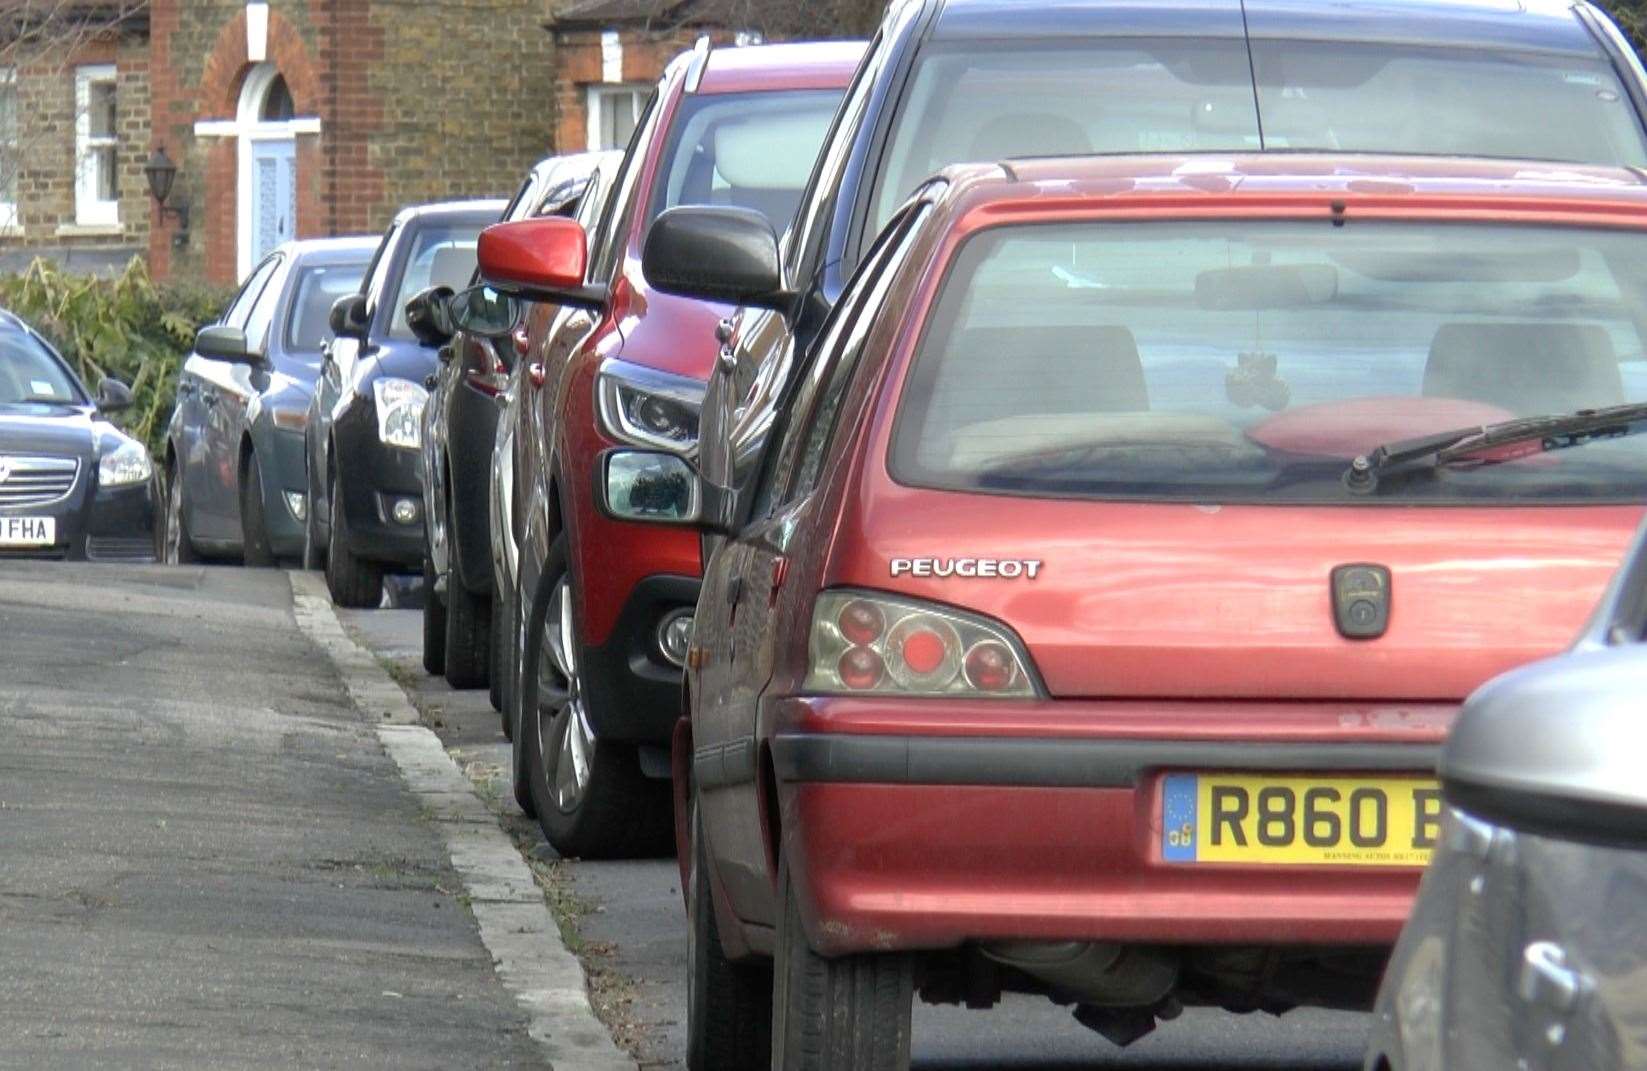 Swale council will maintain changes to parking restrictions to support residents and NHS workers